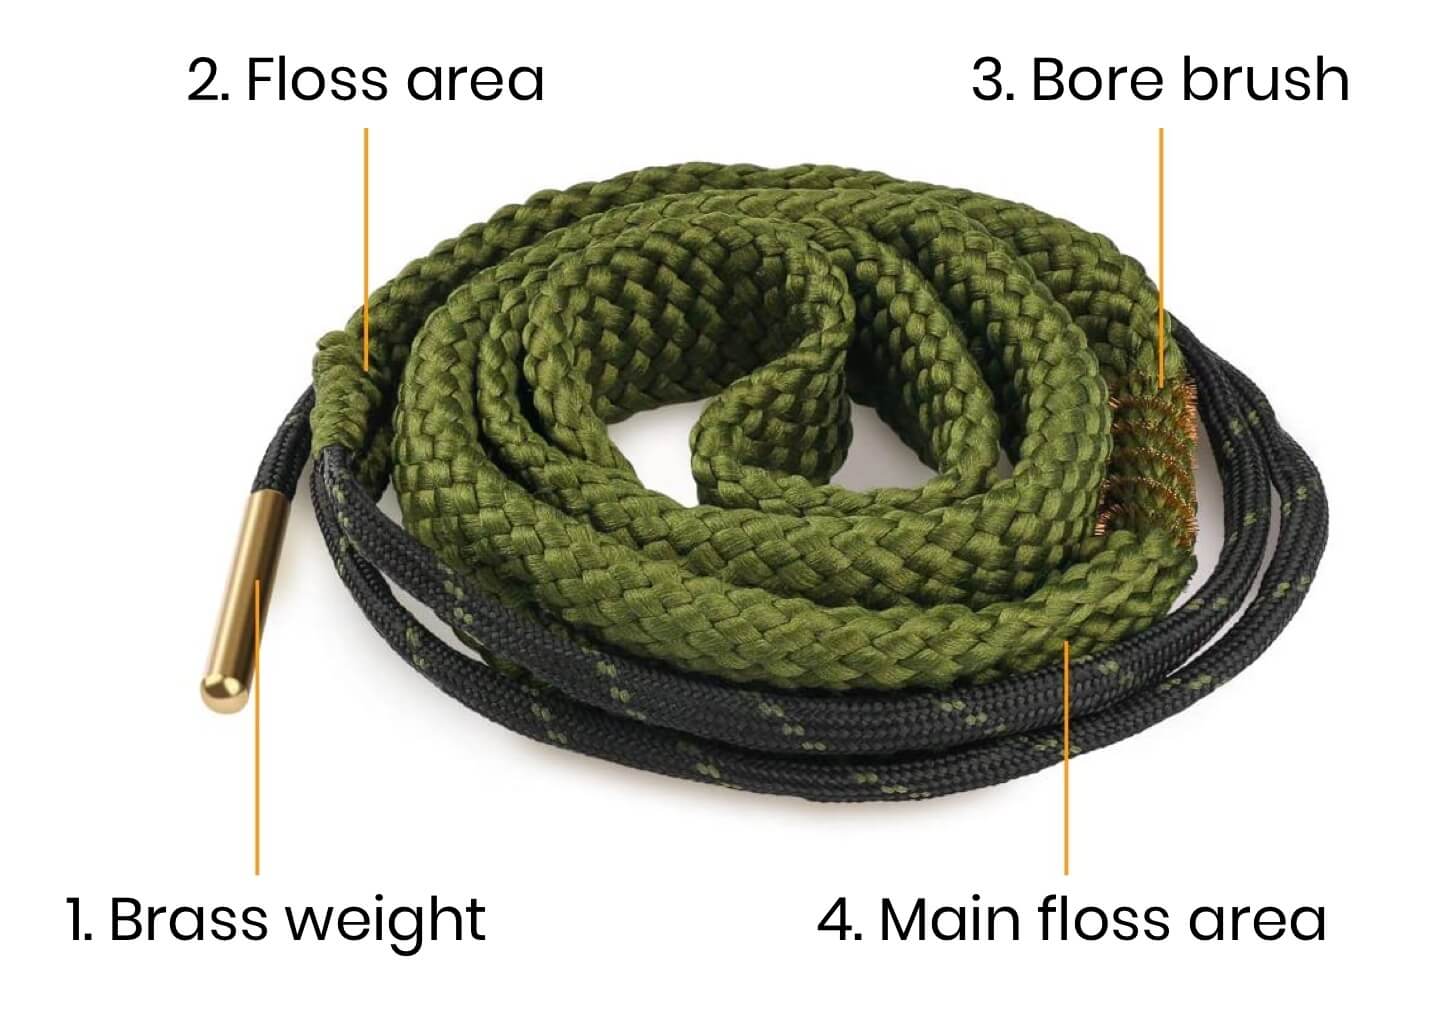 The different parts and sections of a bore snake